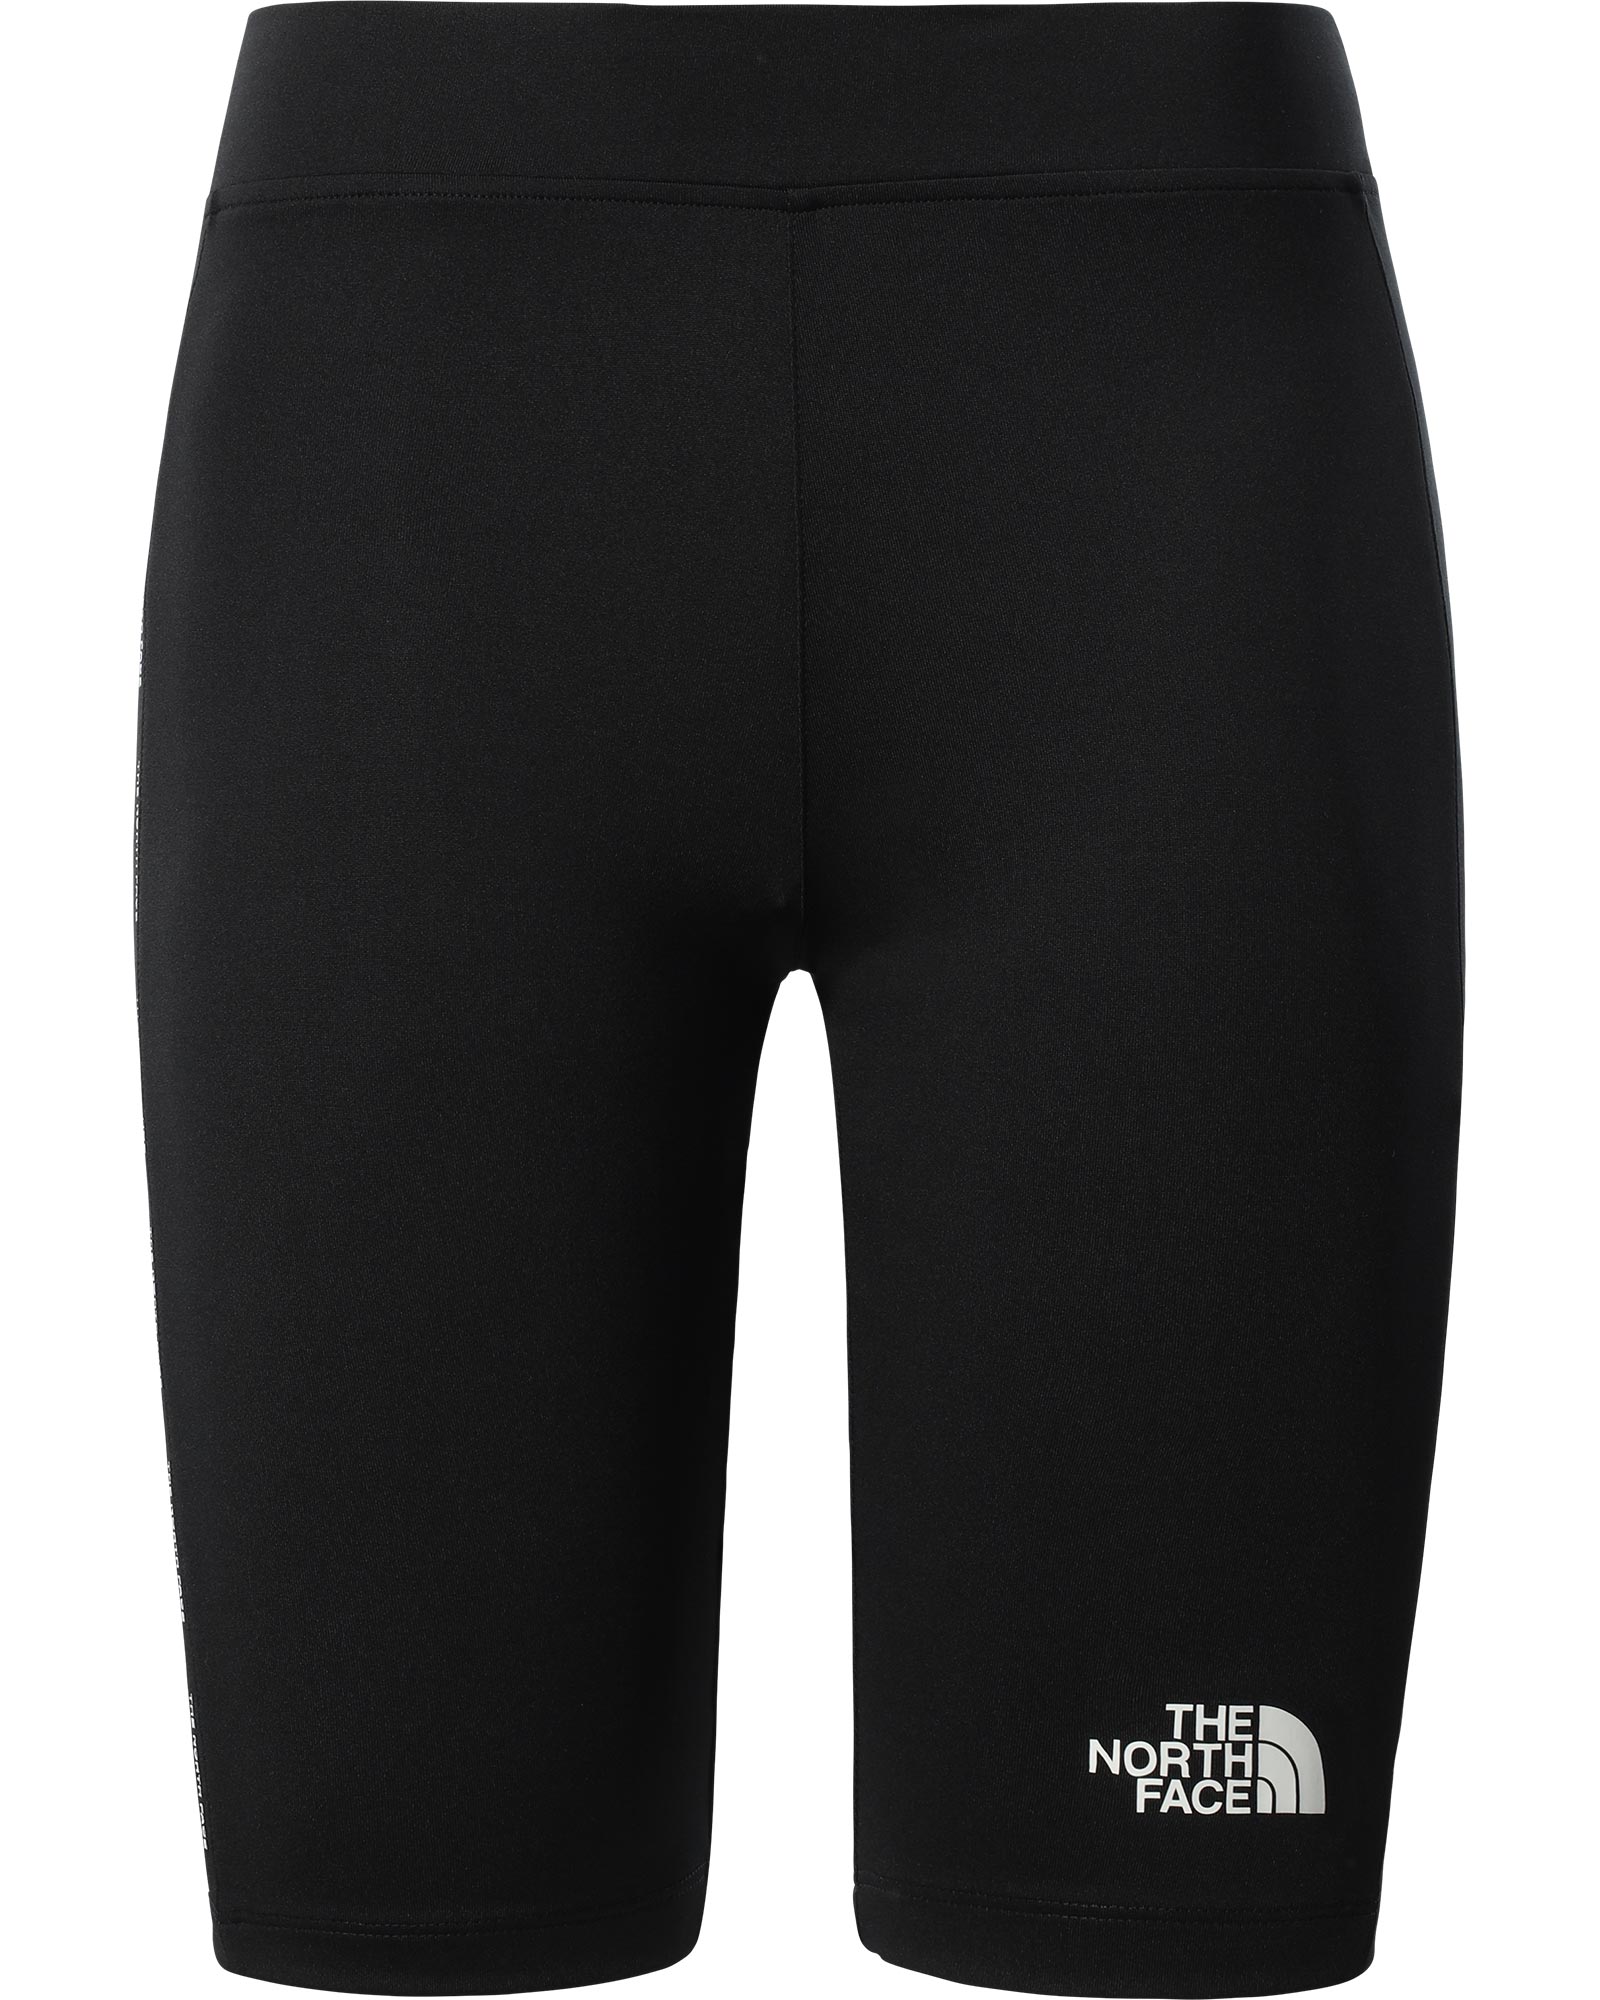 The North Face Ma Short Womens Tights